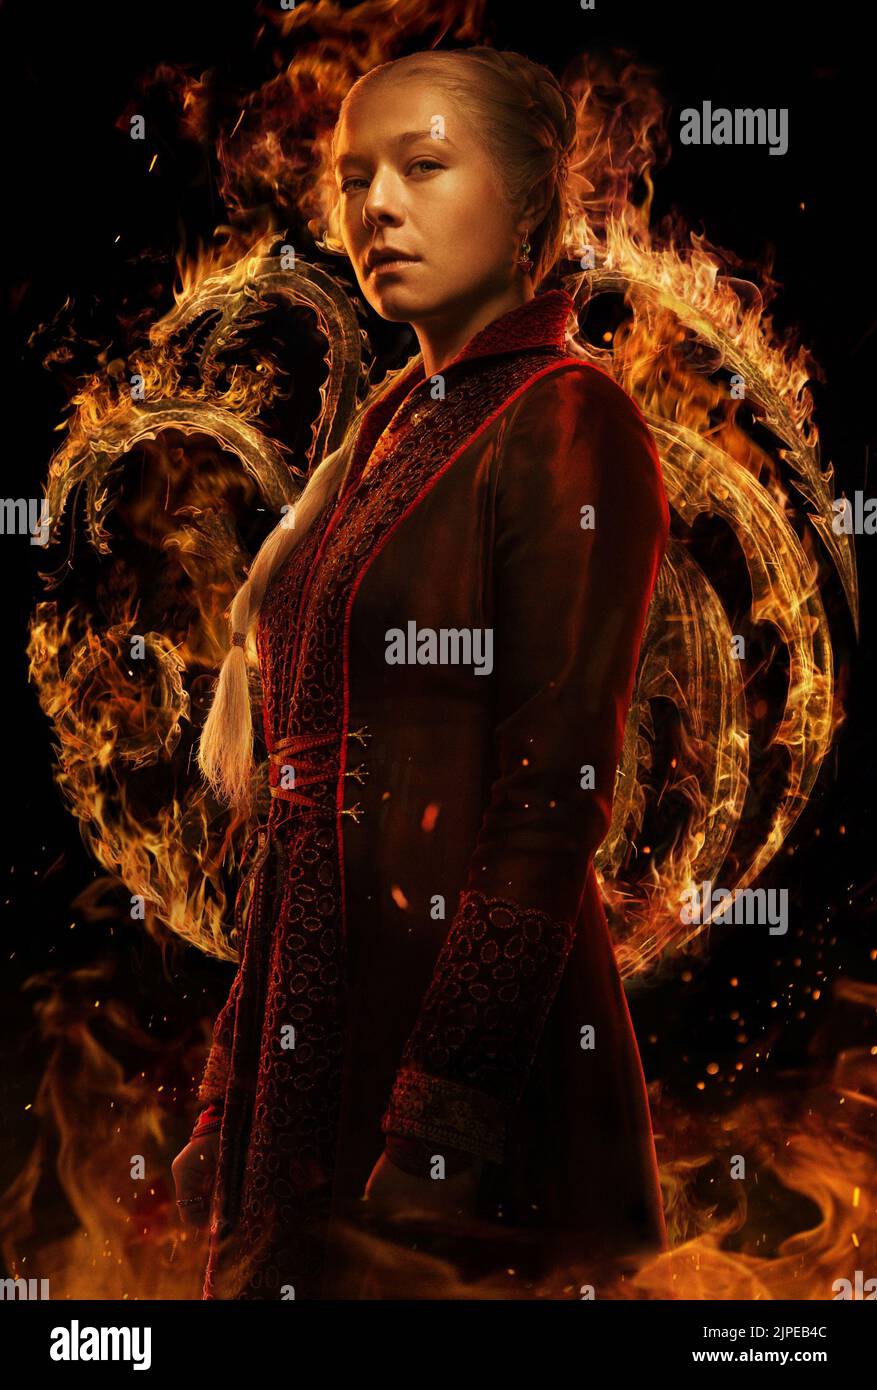 USA. Emma D'Arcy in the (C)HBO new series: House of the Dragon (2022).  Plot: The story of the House Targaryen set 300 years before the events of Game of Thrones (2011).  Ref: LMK106-J8255-150822 Supplied by LMKMEDIA. Editorial Only. Landmark Media is not the copyright owner of these Film or TV stills but provides a service only for recognised Media outlets. pictures@lmkmedia.com Stock Photo